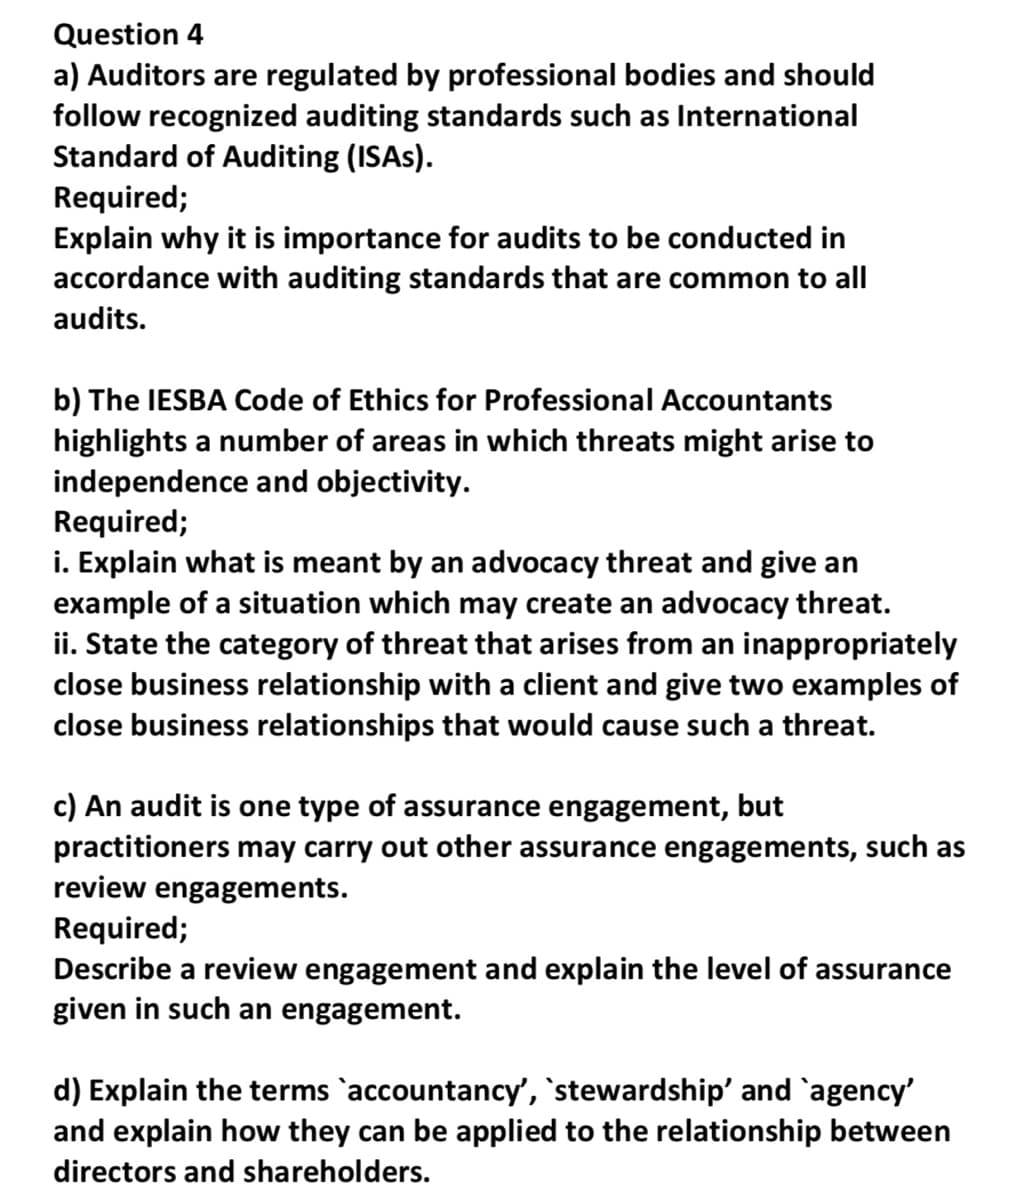 Question 4
a) Auditors are regulated by professional bodies and should
follow recognized auditing standards such as International
Standard of Auditing (ISAs).
Required;
Explain why it is importance for audits to be conducted in
accordance with auditing standards that are common to all
audits.
b) The IESBA Code of Ethics for Professional Accountants
highlights a number of areas in which threats might arise to
independence and objectivity.
Required;
i. Explain what is meant by an advocacy threat and give an
example of a situation which may create an advocacy threat.
ii. State the category of threat that arises from an inappropriately
close business relationship with a client and give two examples of
close business relationships that would cause such a threat.
c) An audit is one type of assurance engagement, but
practitioners may carry out other assurance engagements, such as
review engagements.
Required;
Describe a review engagement and explain the level of assurance
given in such an engagement.
d) Explain the terms `accountancy', `stewardship' and `agency'
and explain how they can be applied to the relationship between
directors and shareholders.